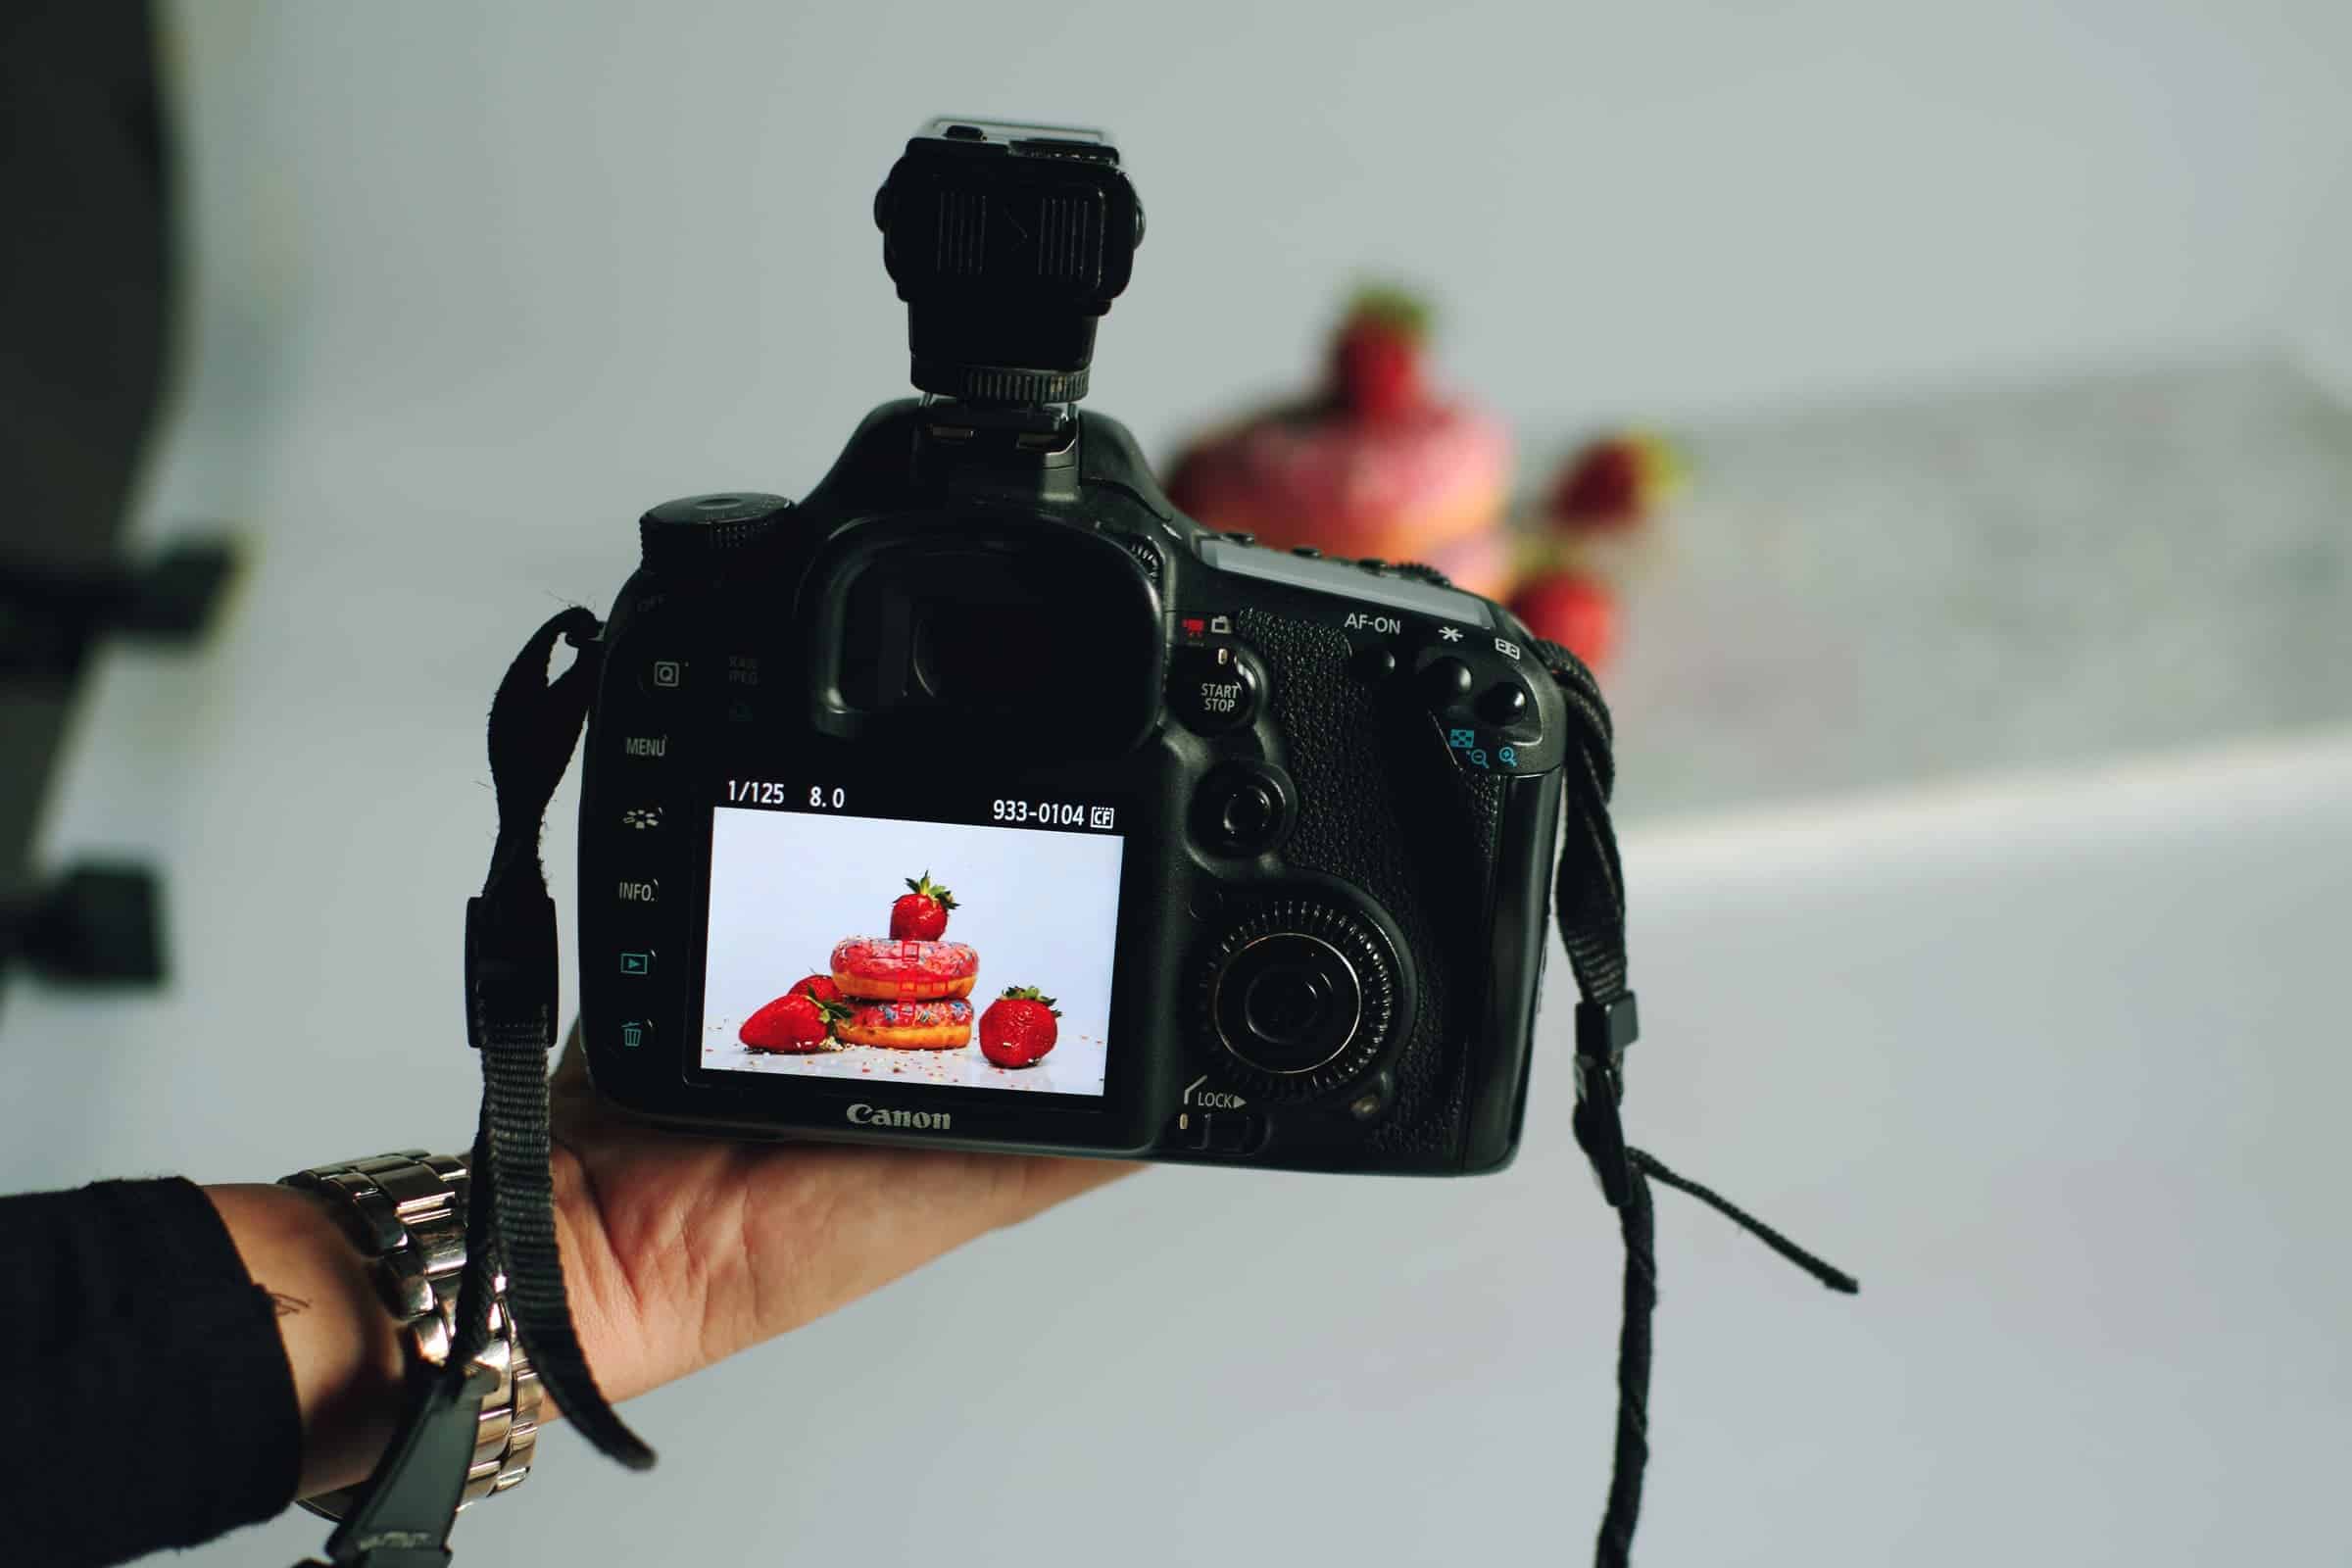 A photograph is being taken of strawberries.